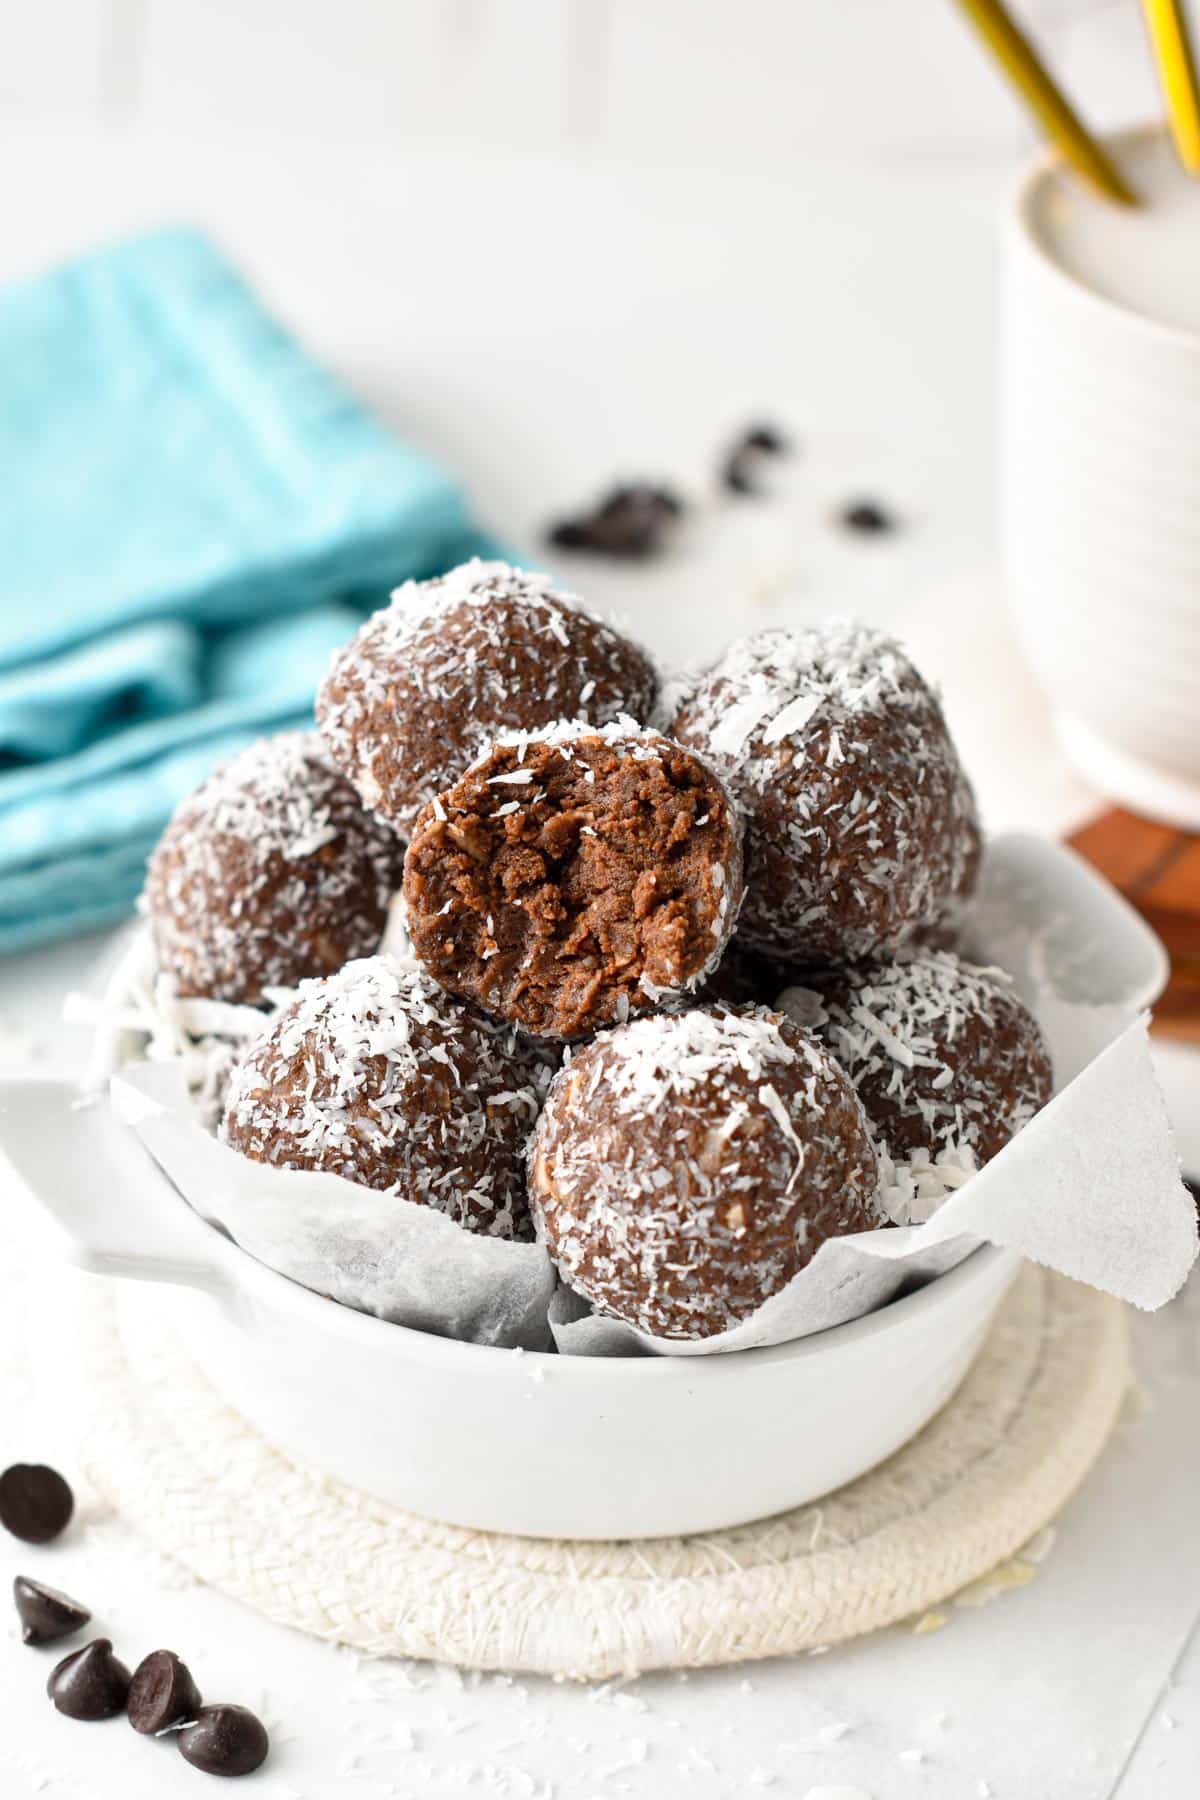 Several Chocolate Coconut Protein Balls on a small presentation ramekin on a white table.